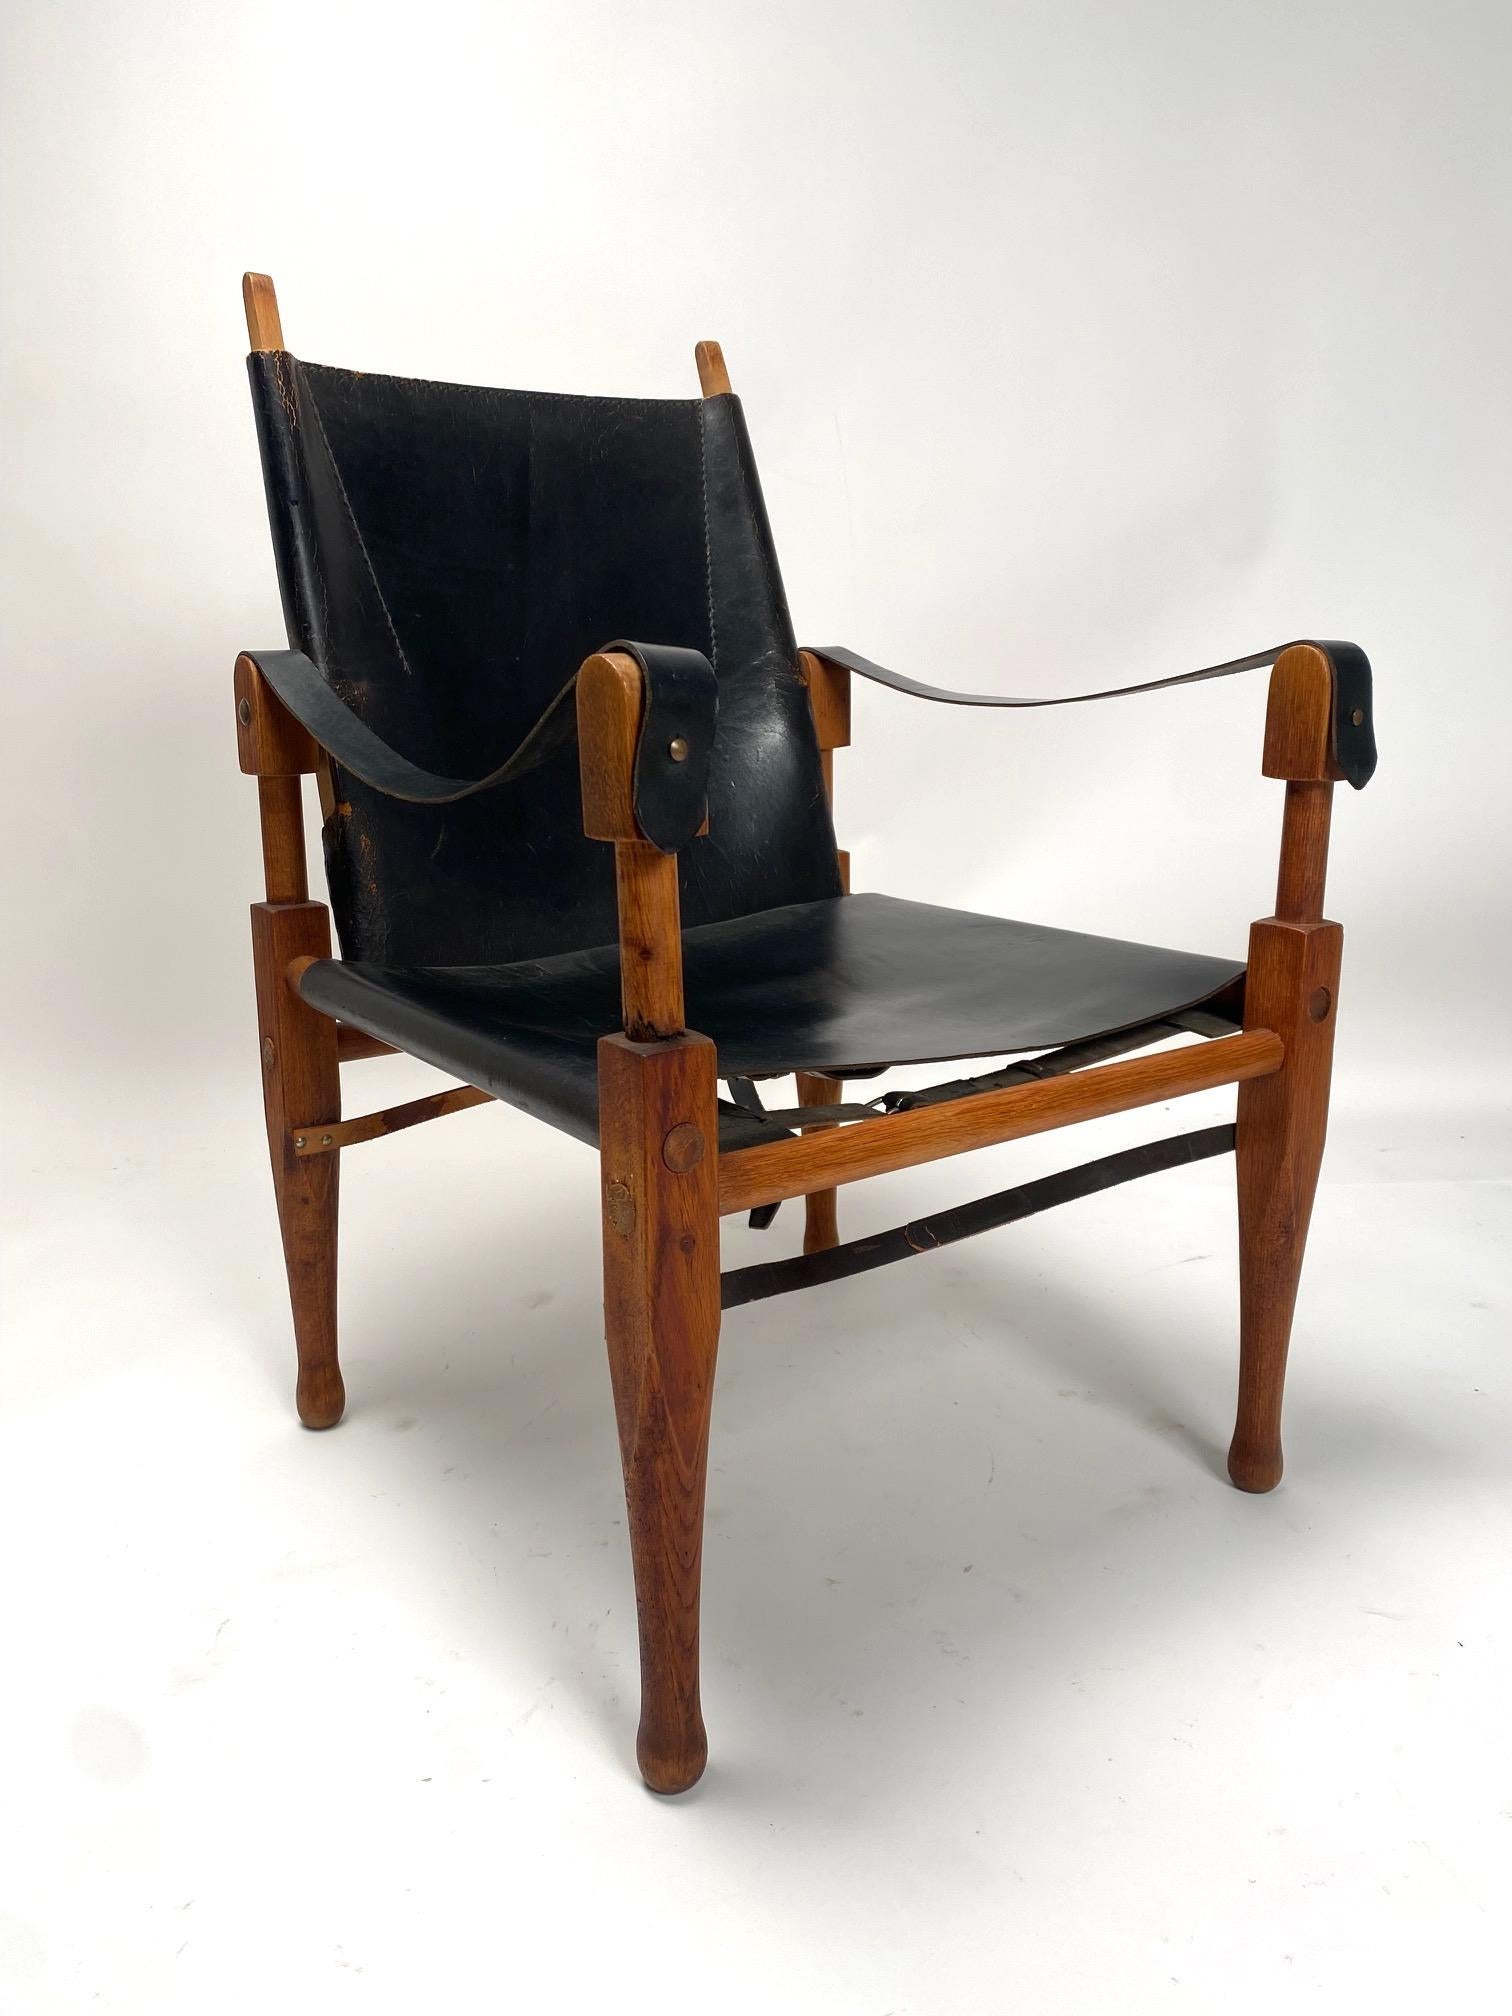 Pair of Safari lounge chairs by Kaare Klint, Rasmussen, Denmark

Pair of Safari Lounge Chairs, in leather and wood, model KK47000 by Kaare Klint (1888-1954) for Rud. Rasmussen Snedkerier, circa 1940s.
The chairs, of great charm and refinement, still